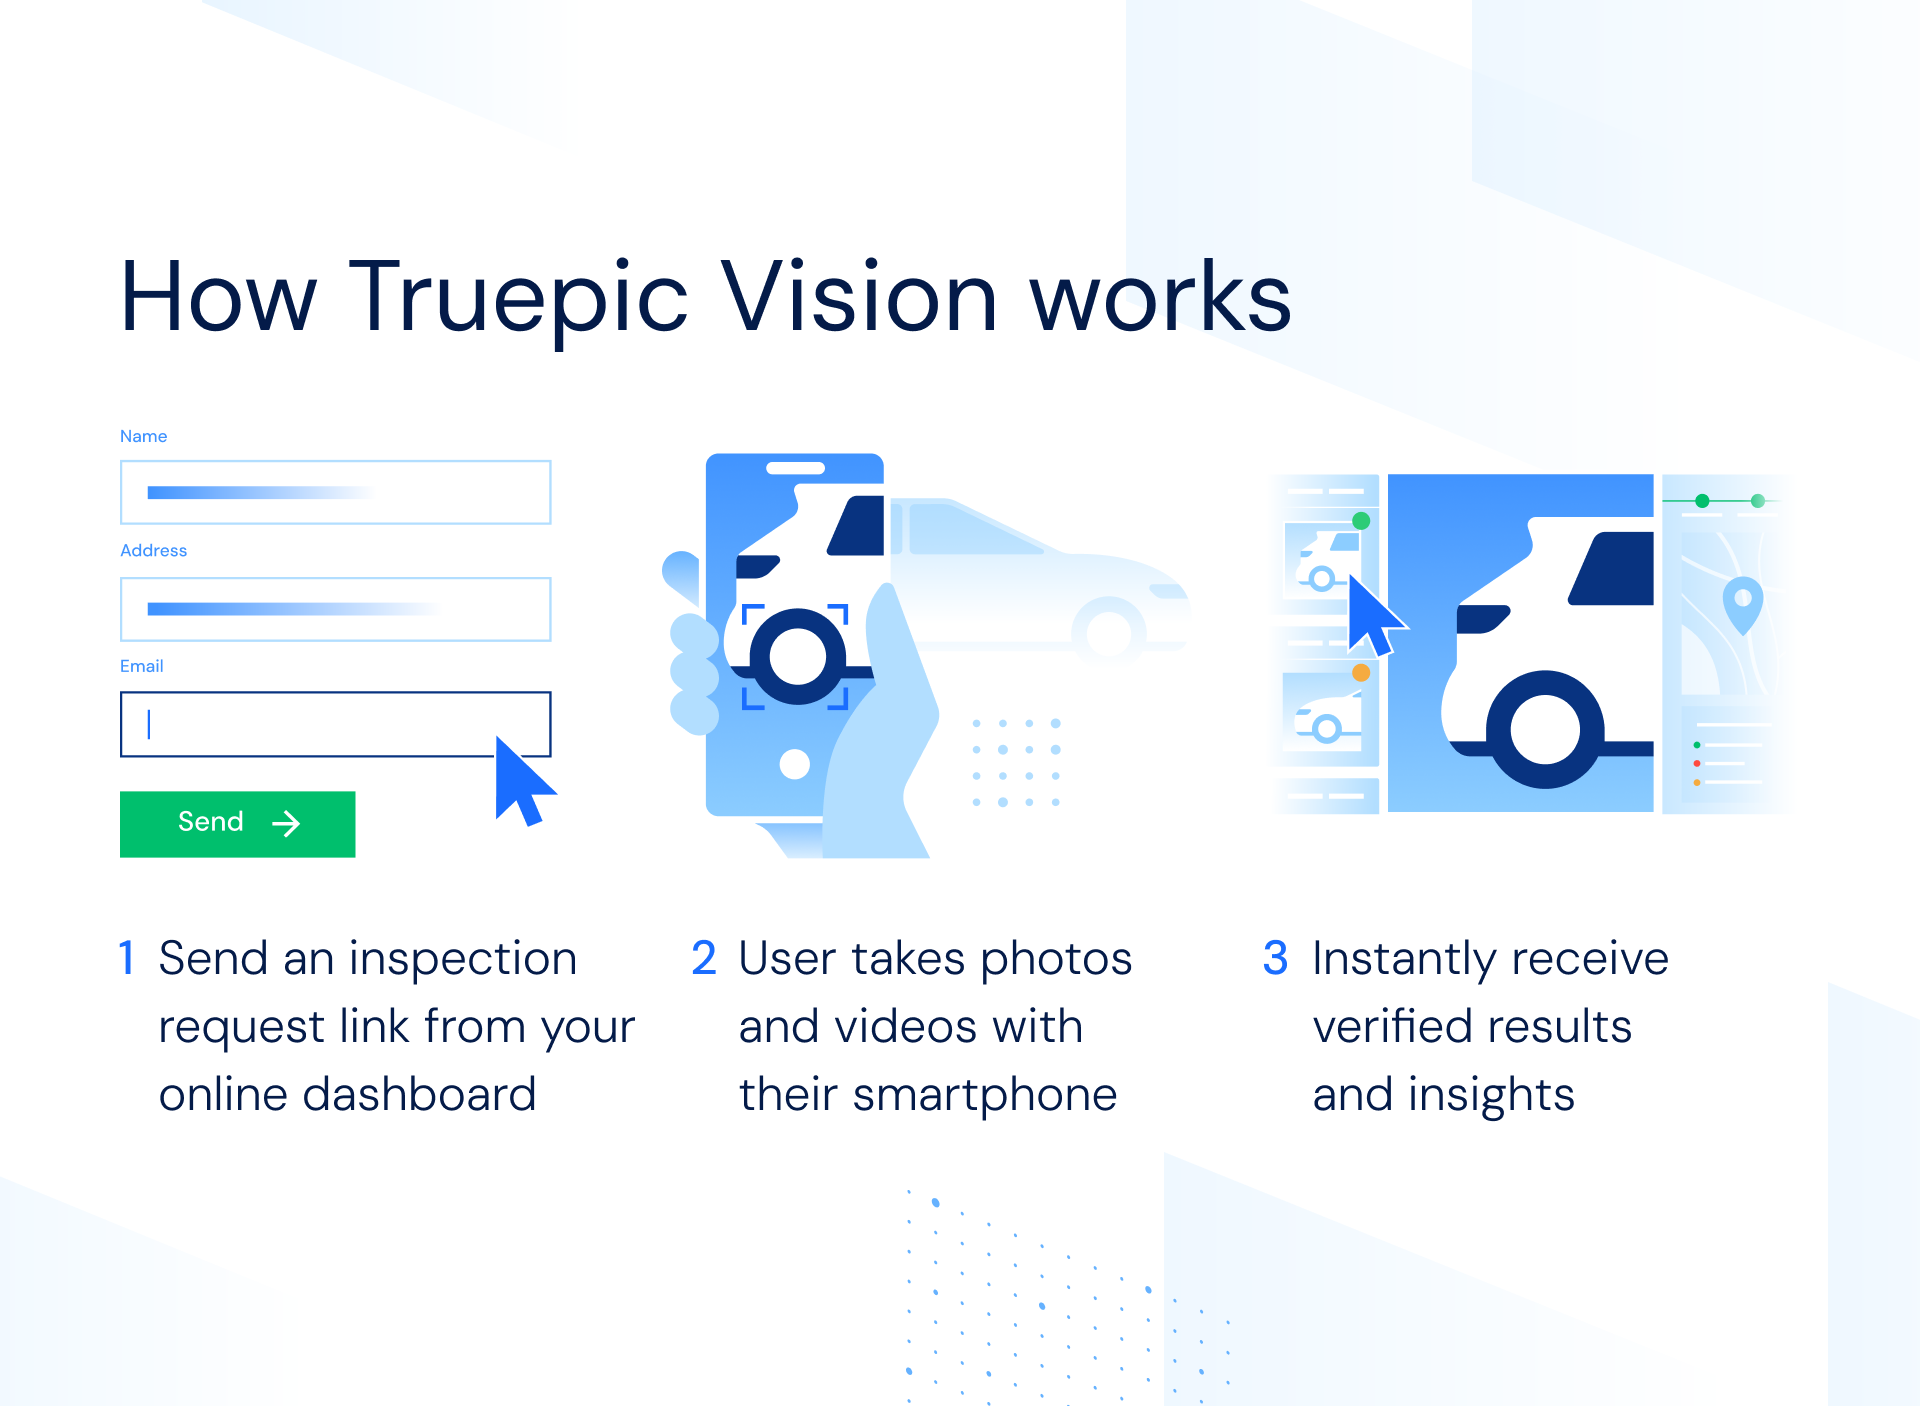 How Truepic Vision Works